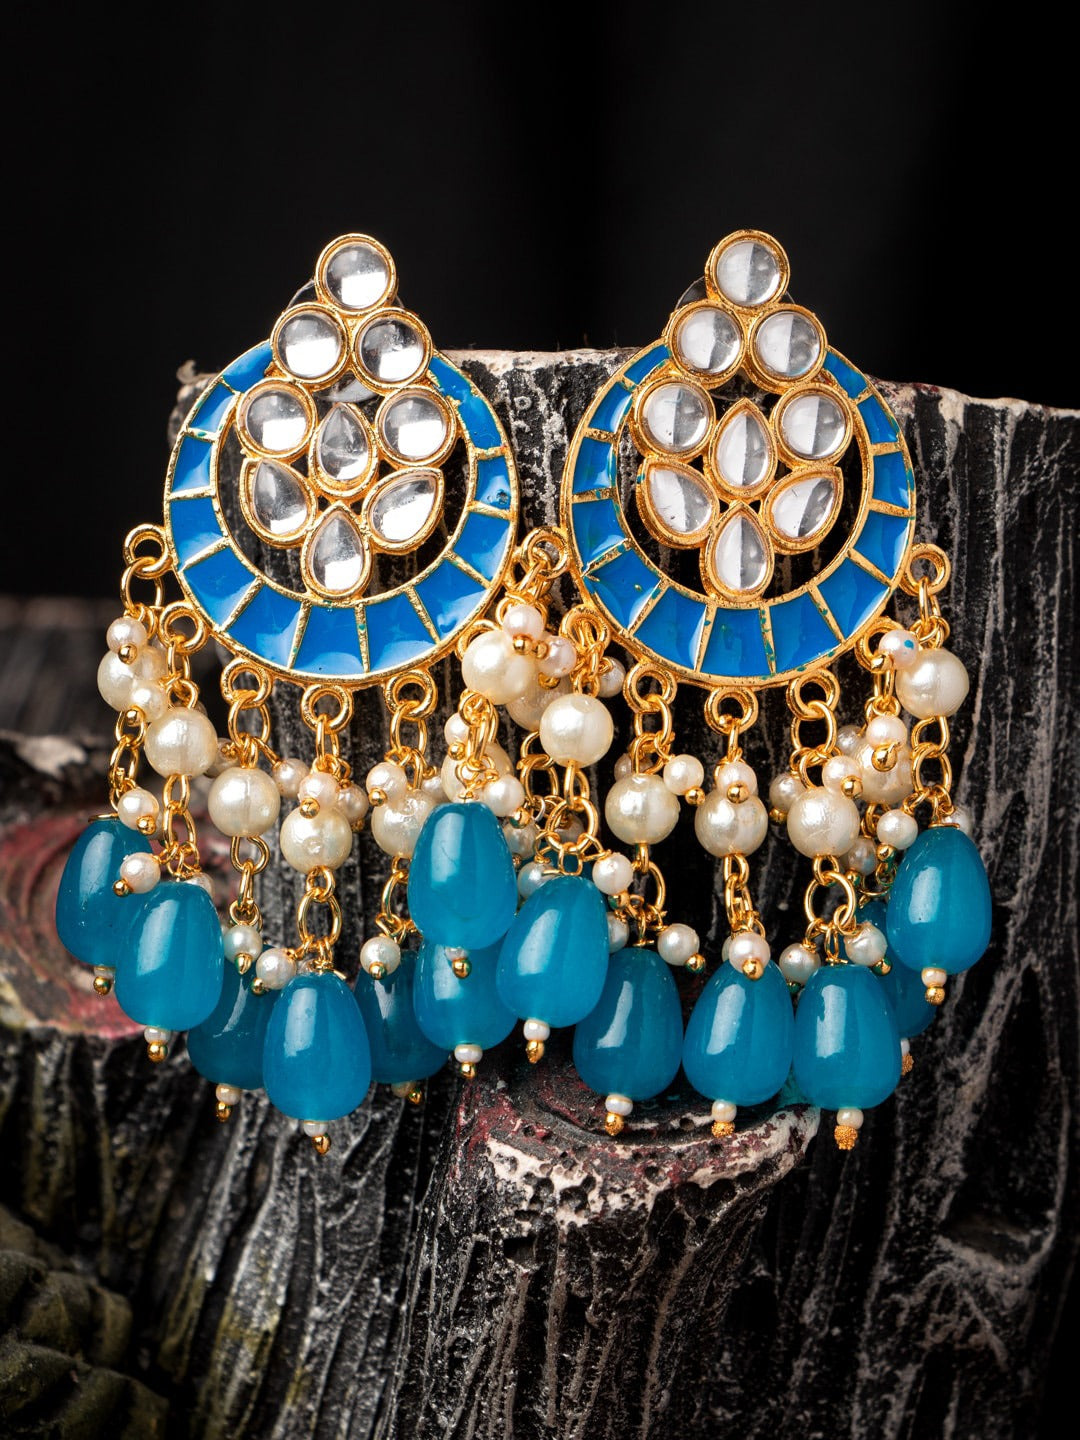 Women's Turquoise Blue Contemporary Chandbalis Earrings - Morkanth